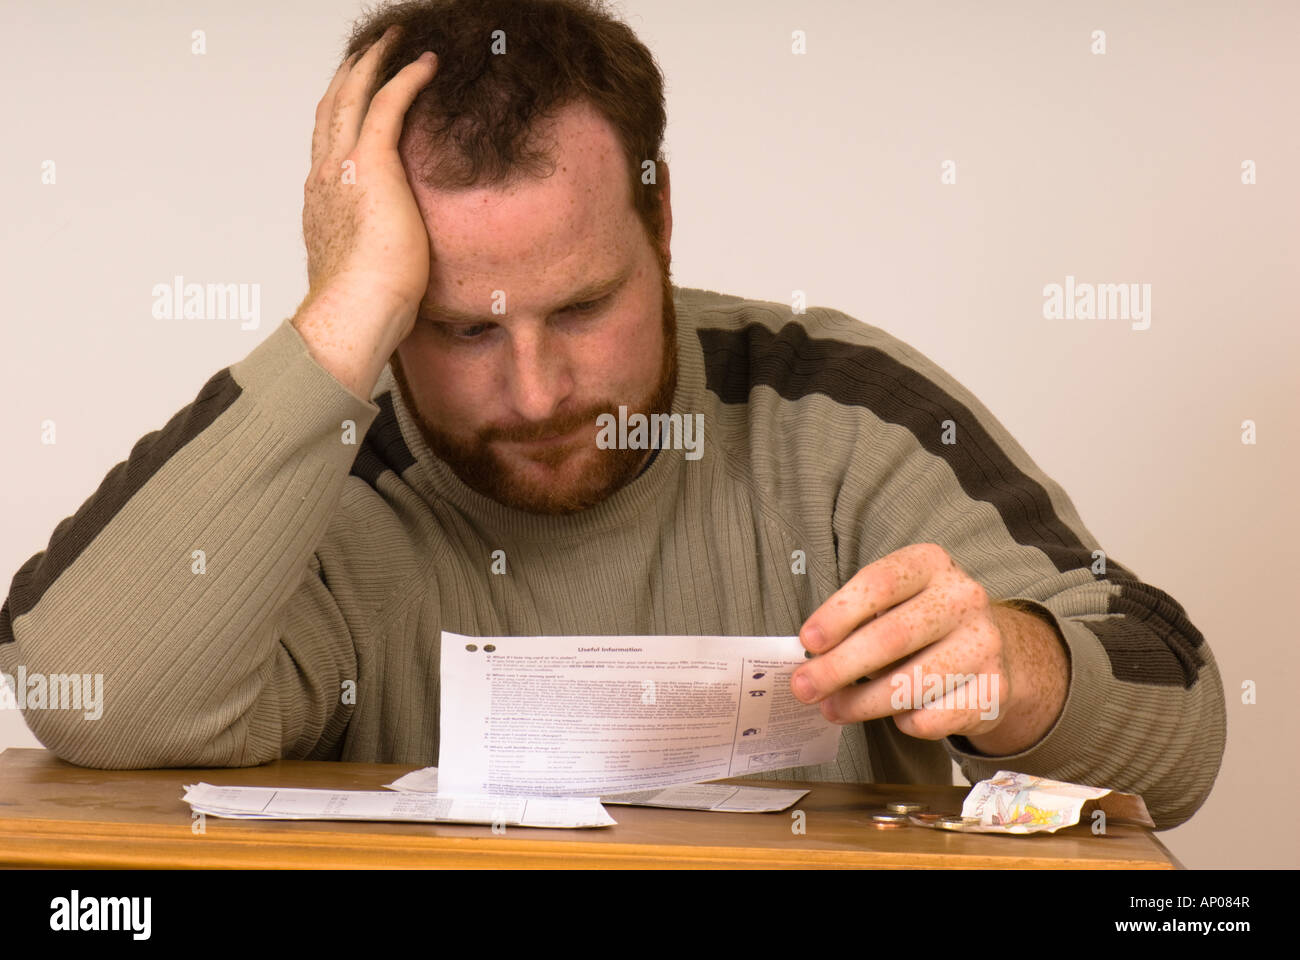 man looking at bank statements, money worries and finance Stock Photo